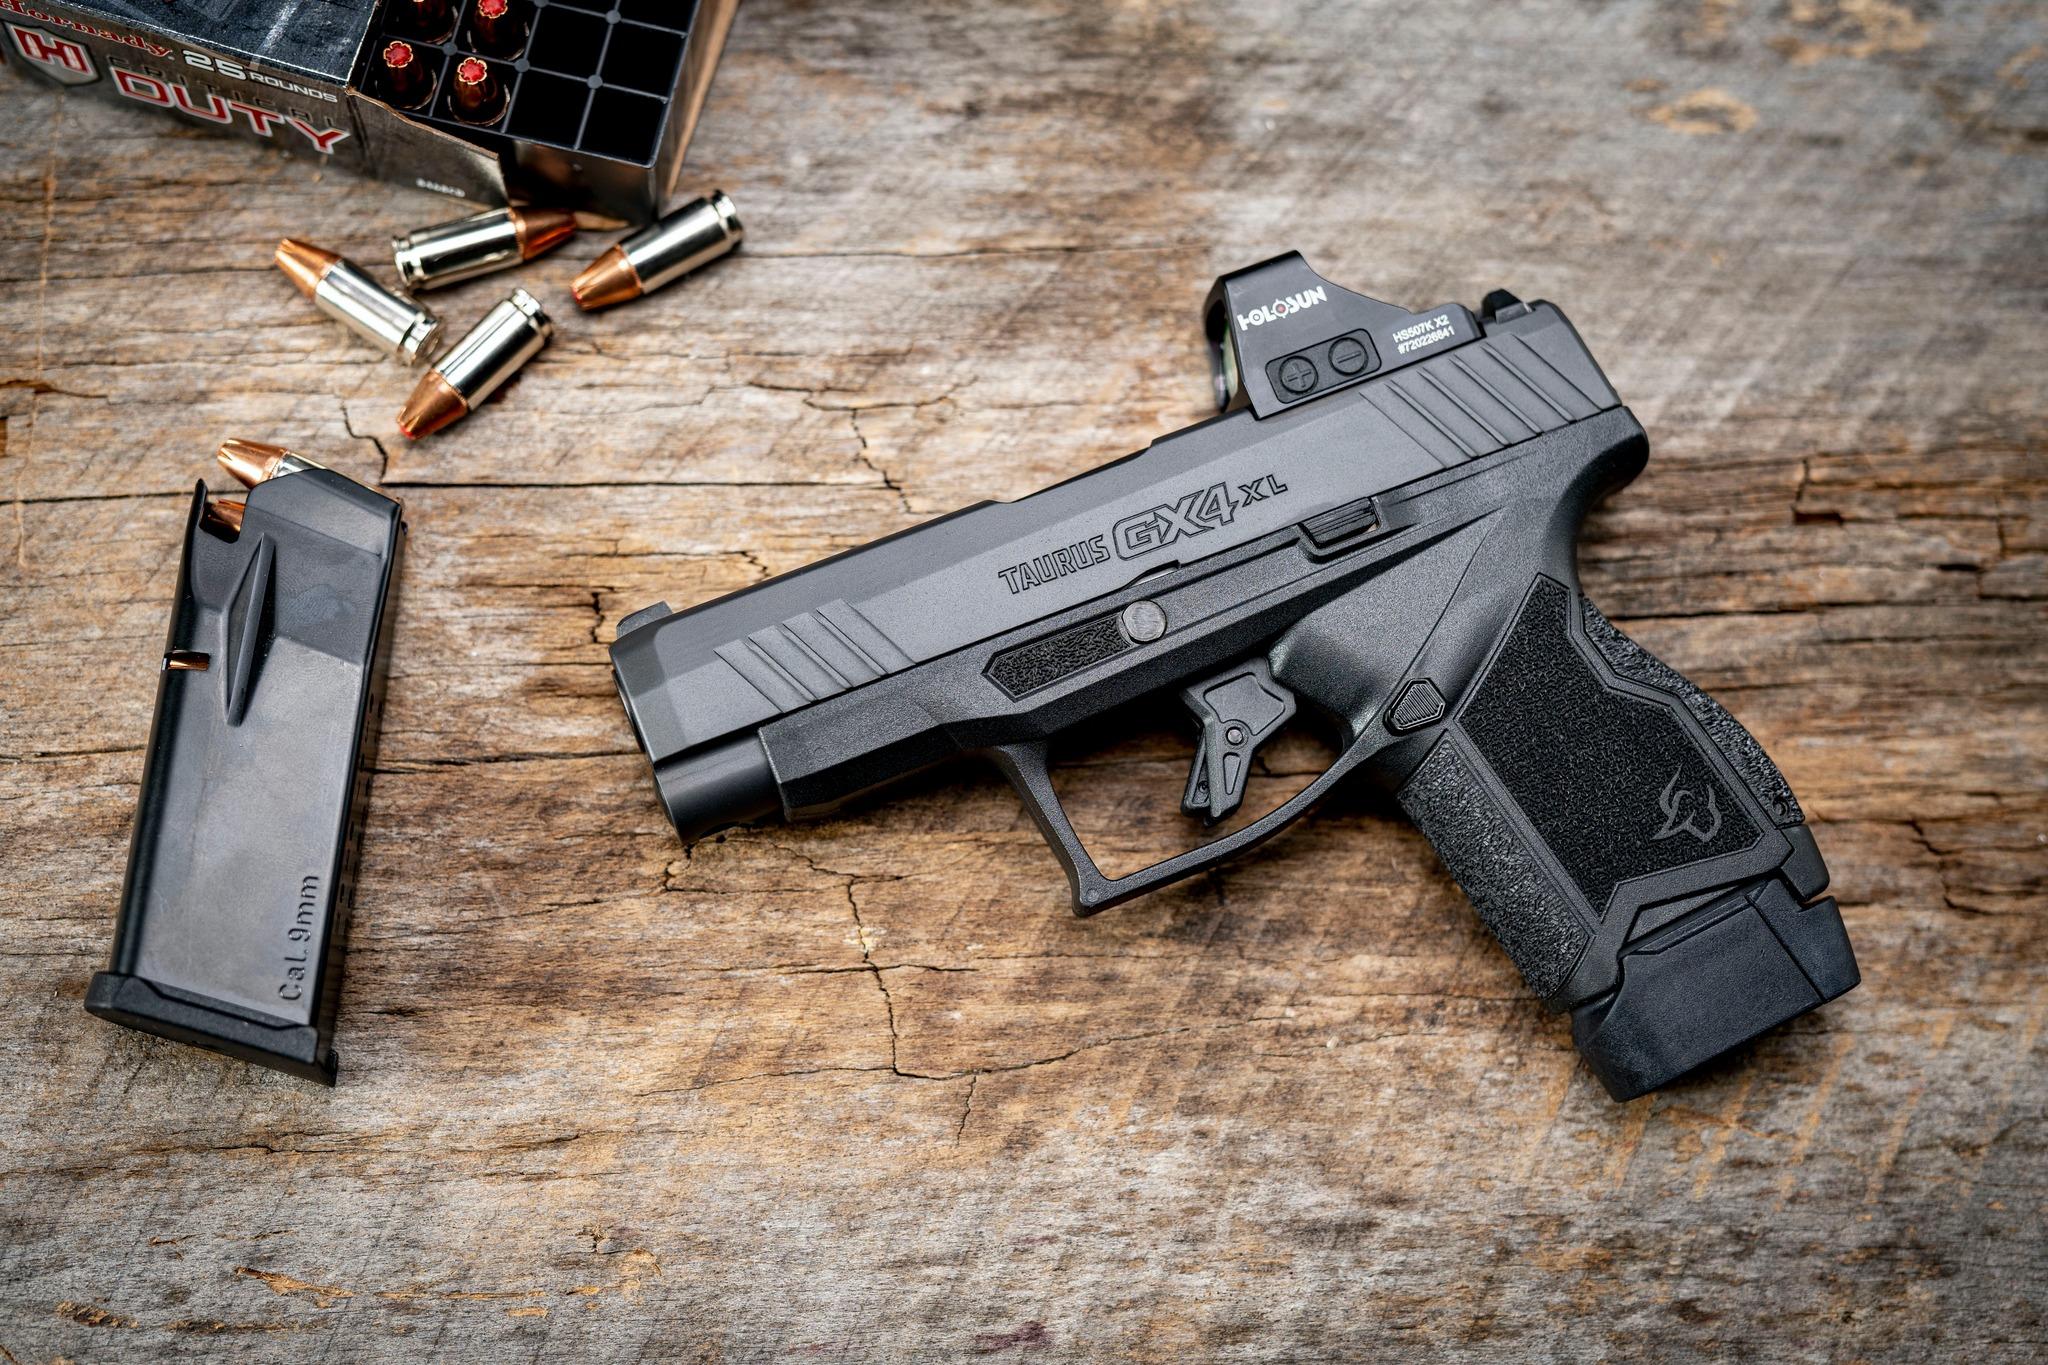 The GX4XL has a 3.7-inch barrel– as opposed to the 3.06-inch barrel on the standard GX4 -- and an extended 13+1 round magazine along with a flush-fit 11+1.